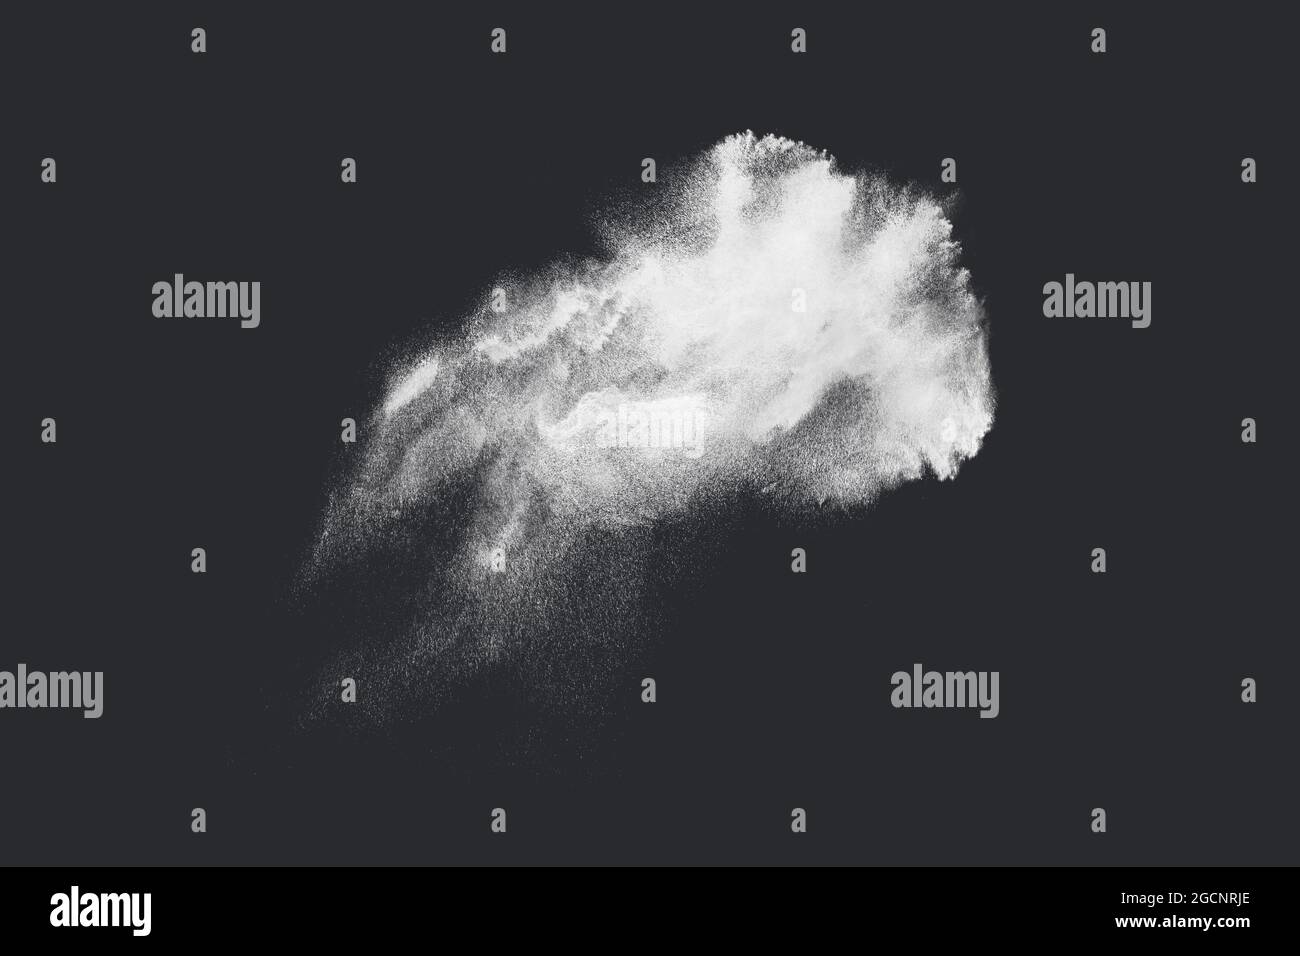 Abstract design of white powder snow cloud explosion on dark background Stock Photo